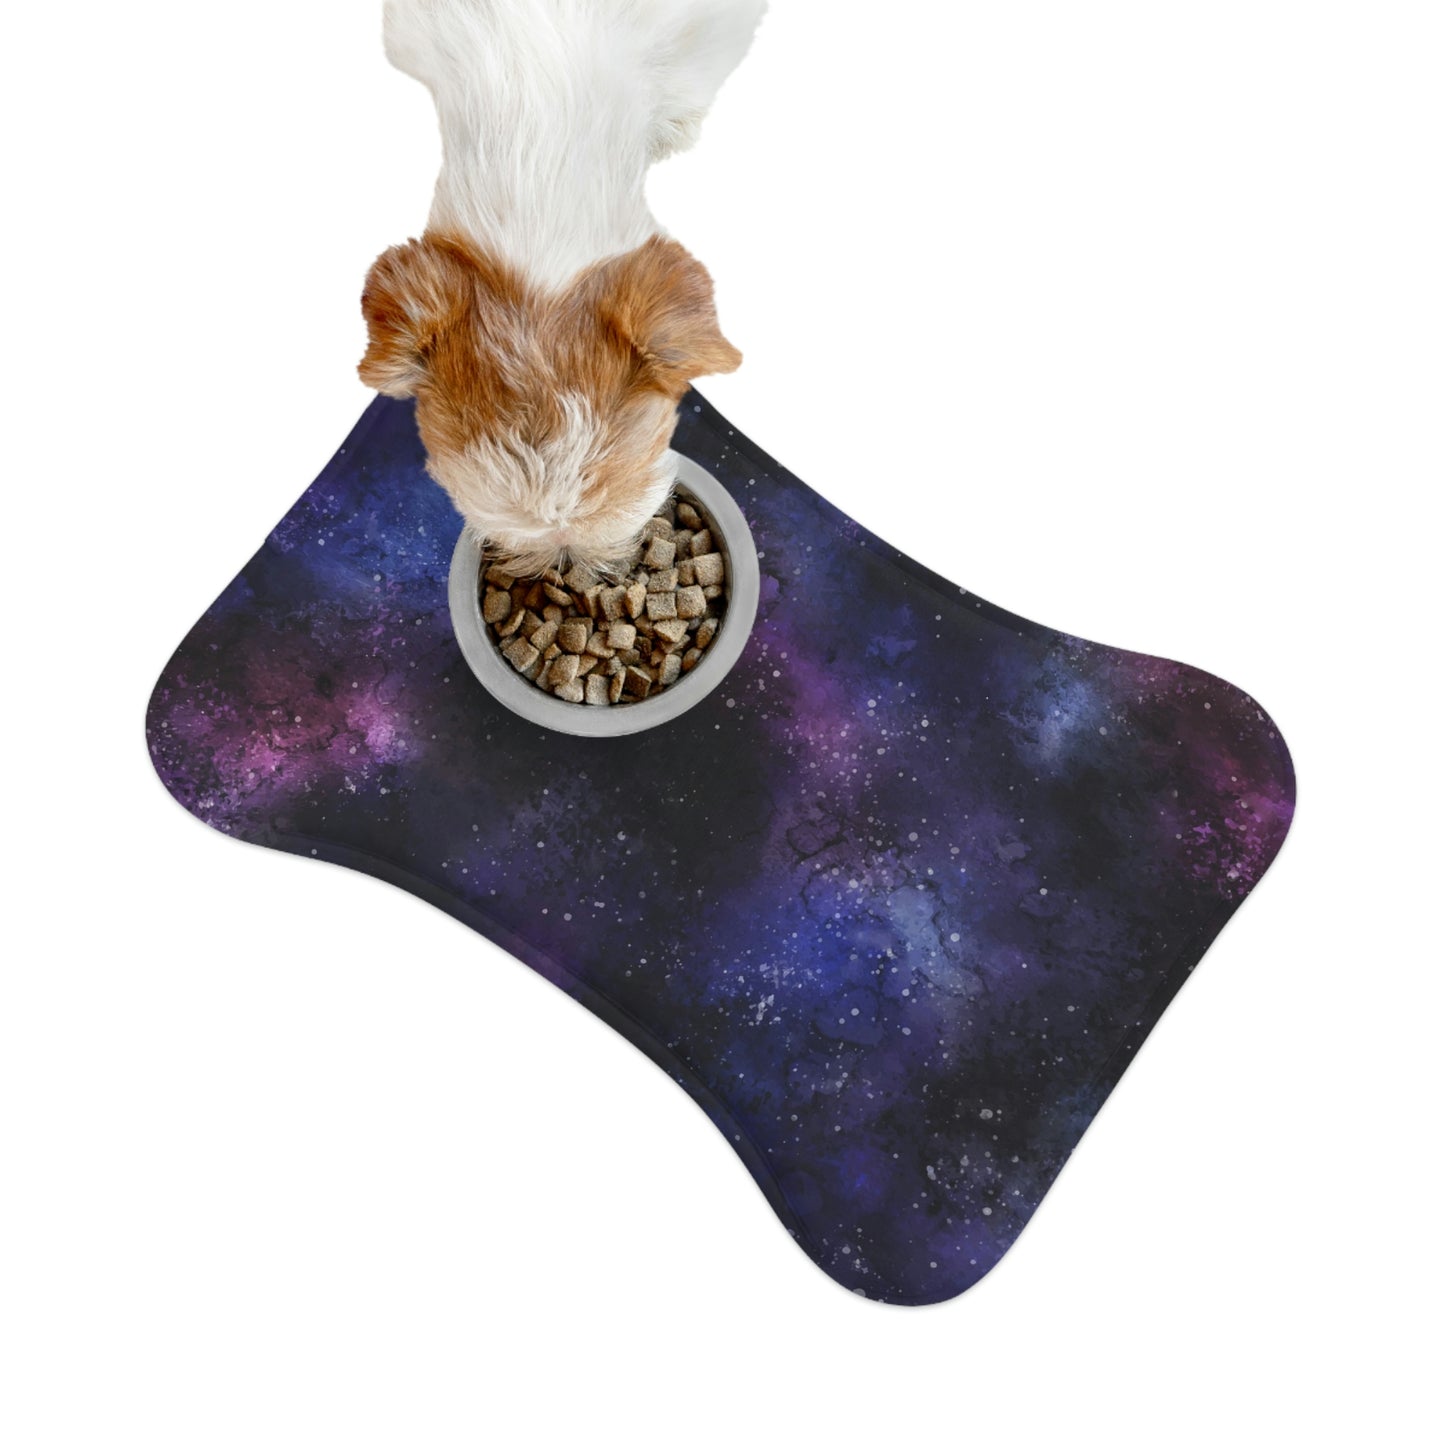 Galaxy Pet Food Mat, Space Universe Dog Cat Bowl Dish Small Large New Feeding Portable Bone Fish Placemat Lover Gift